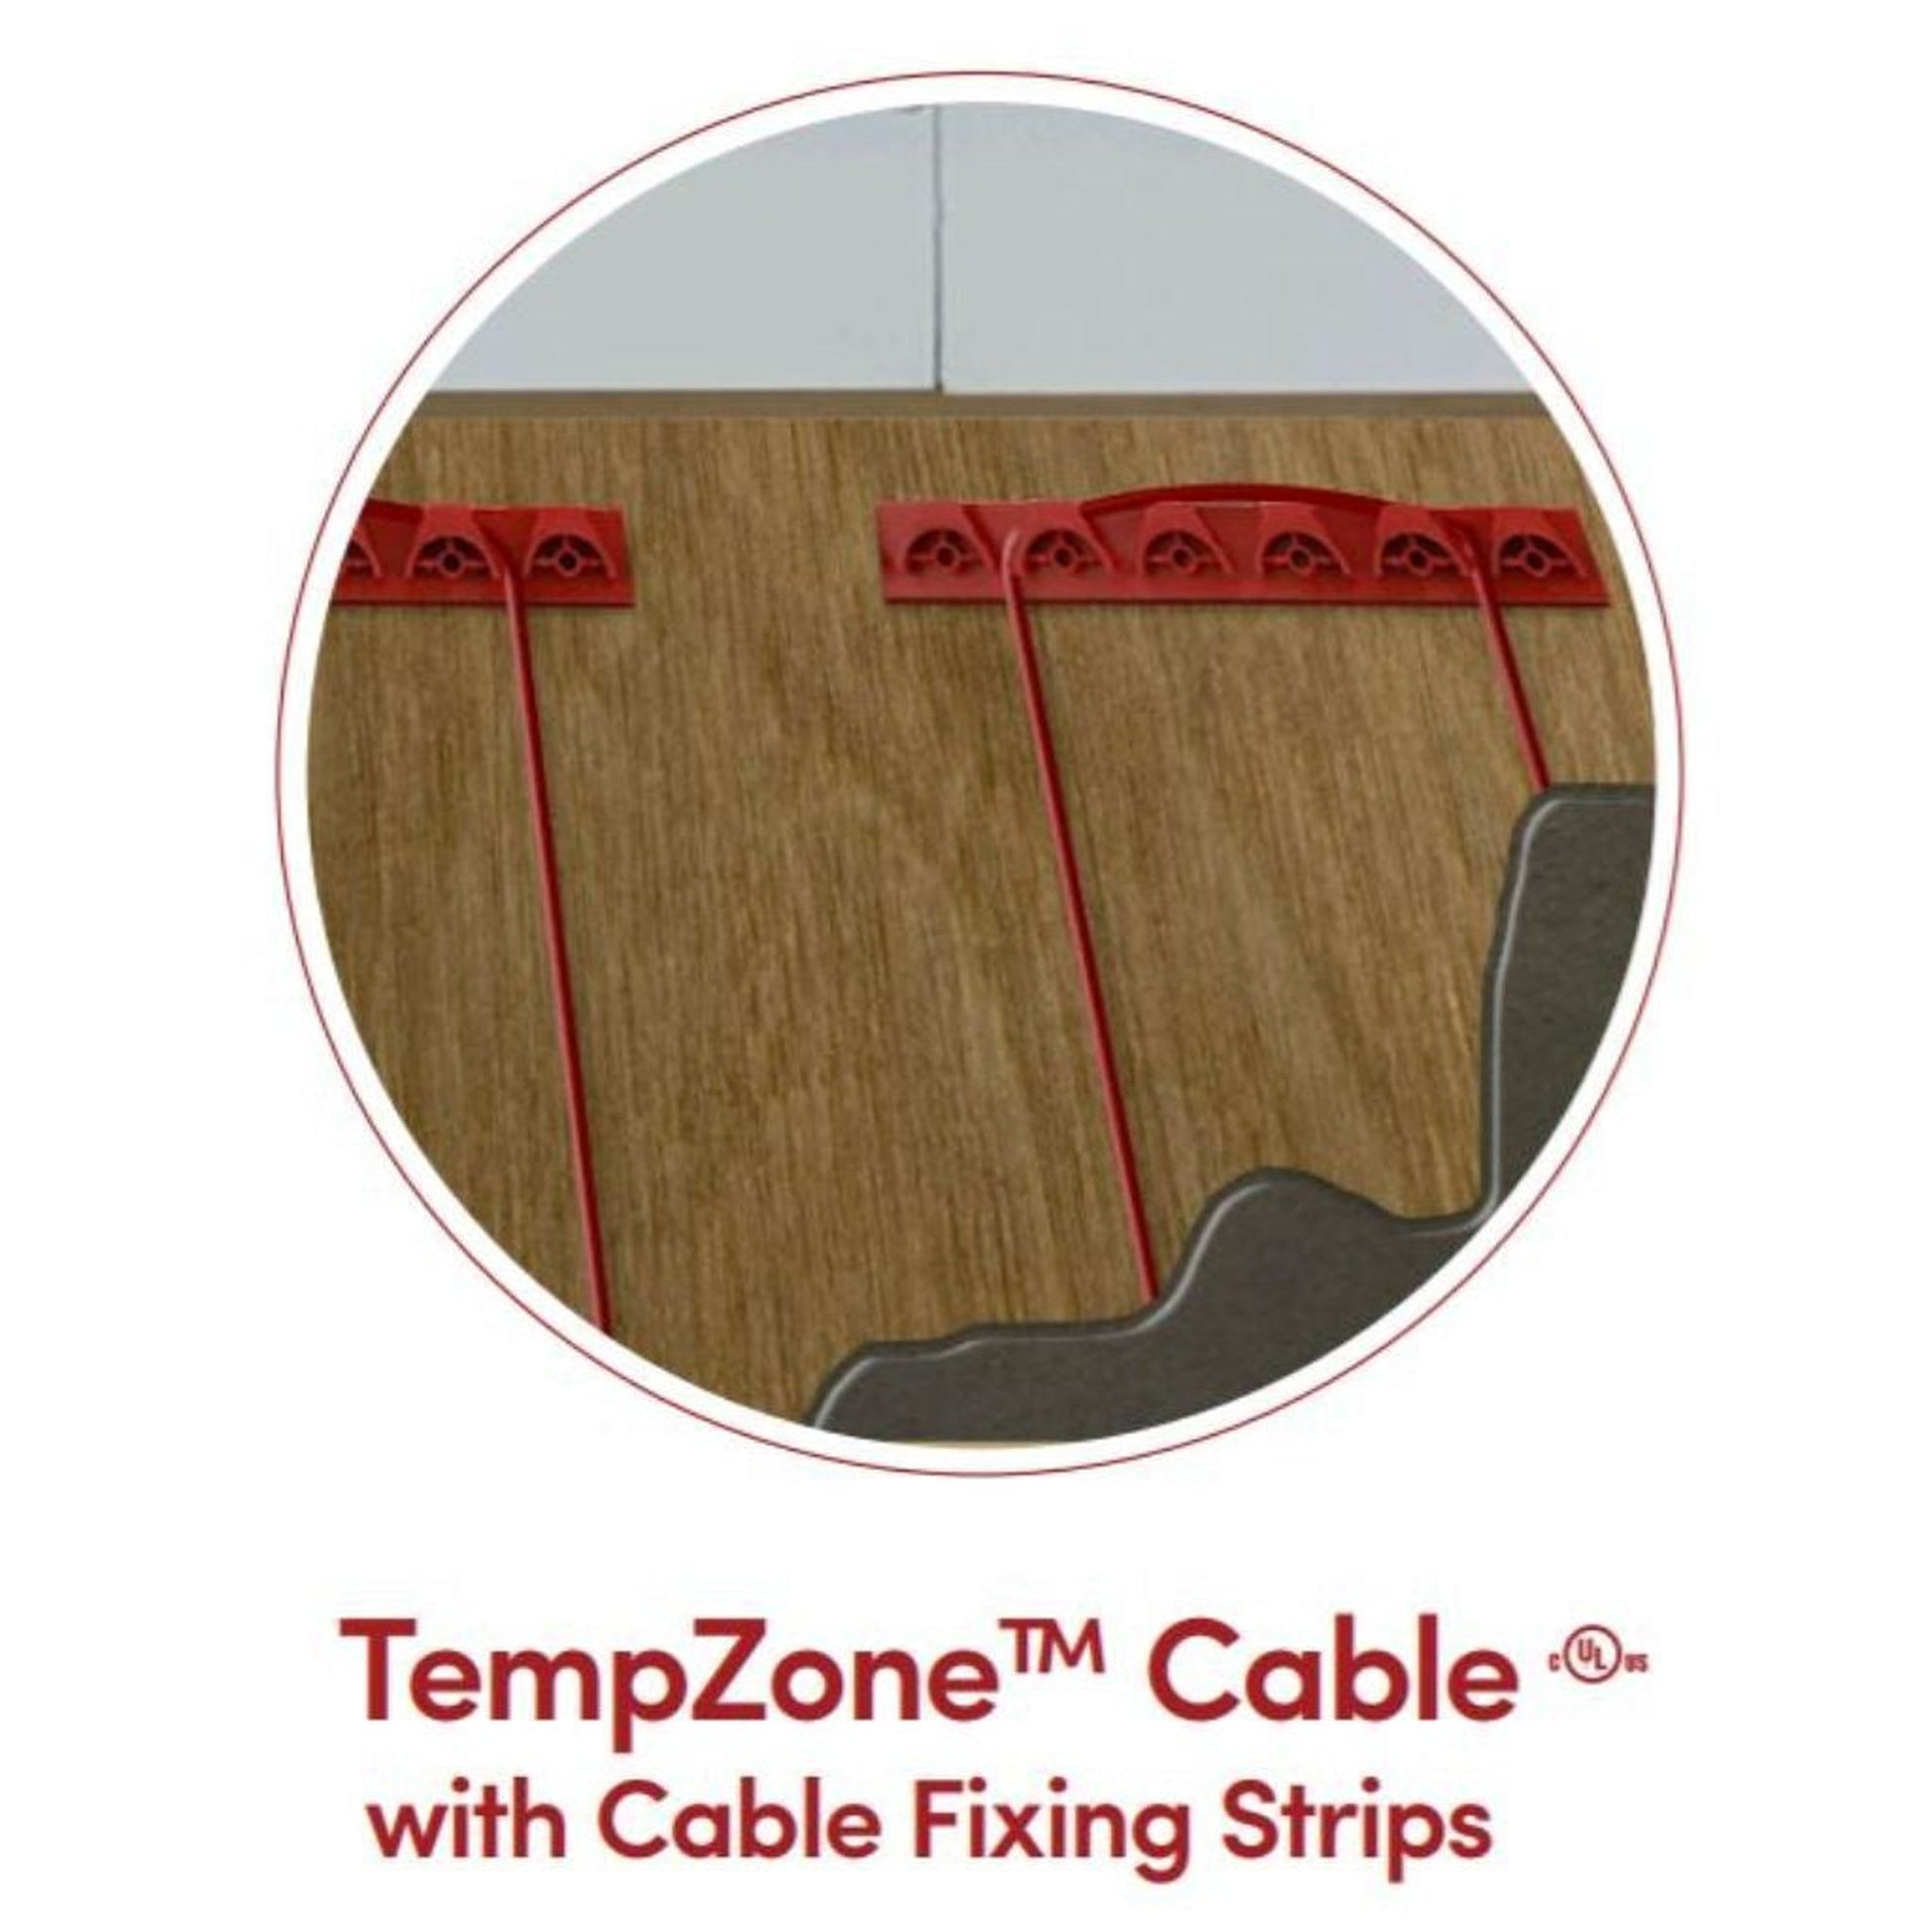 WarmlyYours TempZone Cable 220′ 120V Radiant Floor Heating Cable System Kit With nSpire Touch Programmable Touchscreen Thermostat